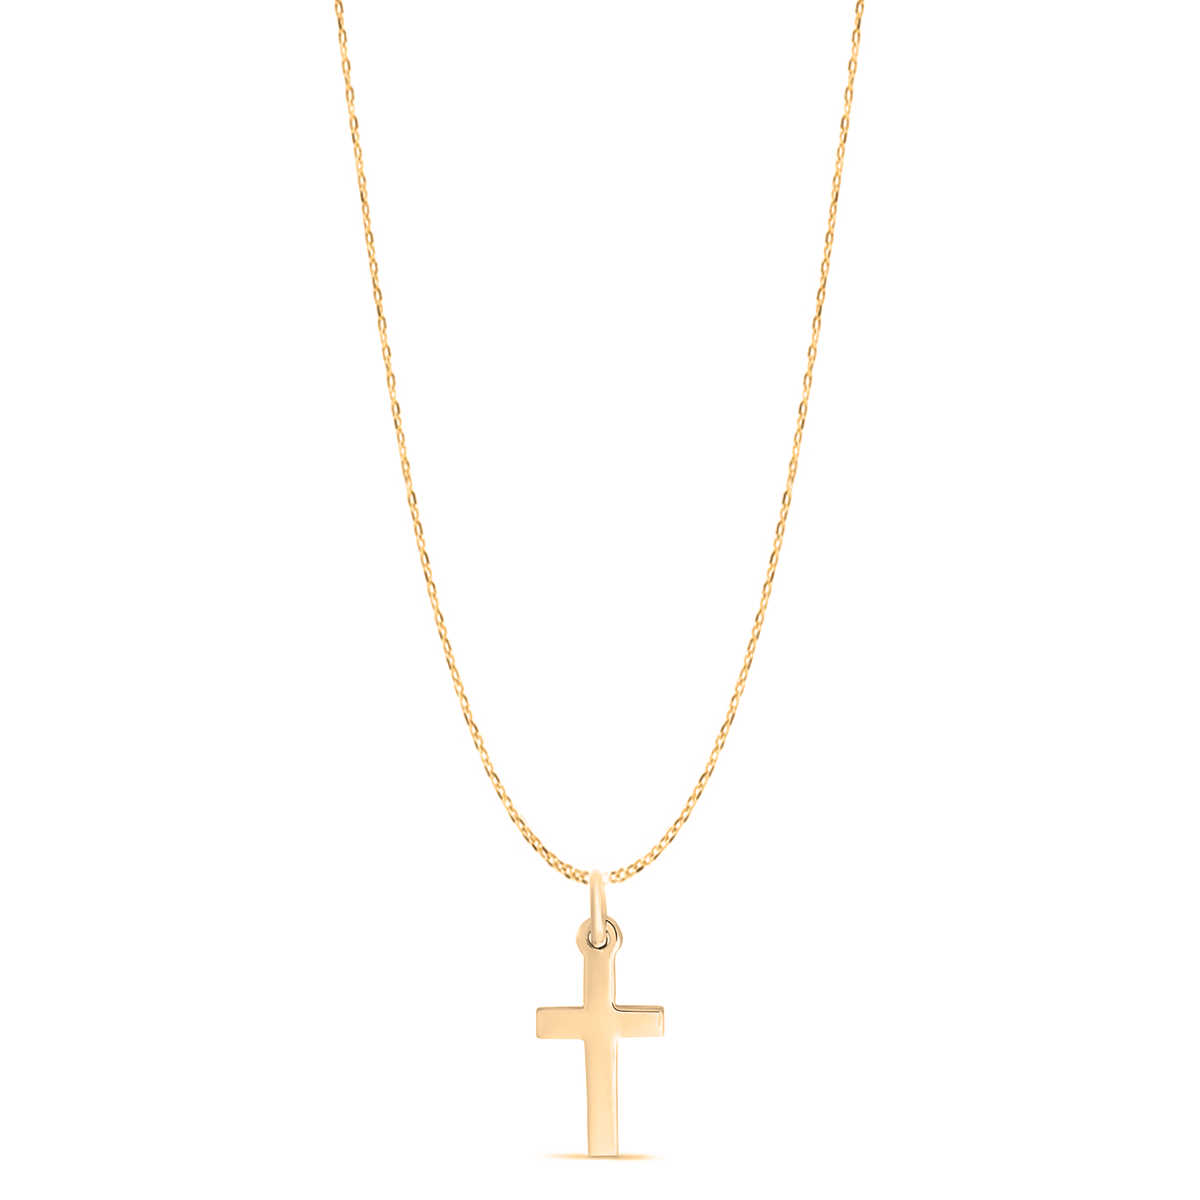 Solid 9ct Gold Deluxe Cross Pendant | Hersey & Son Silversmiths